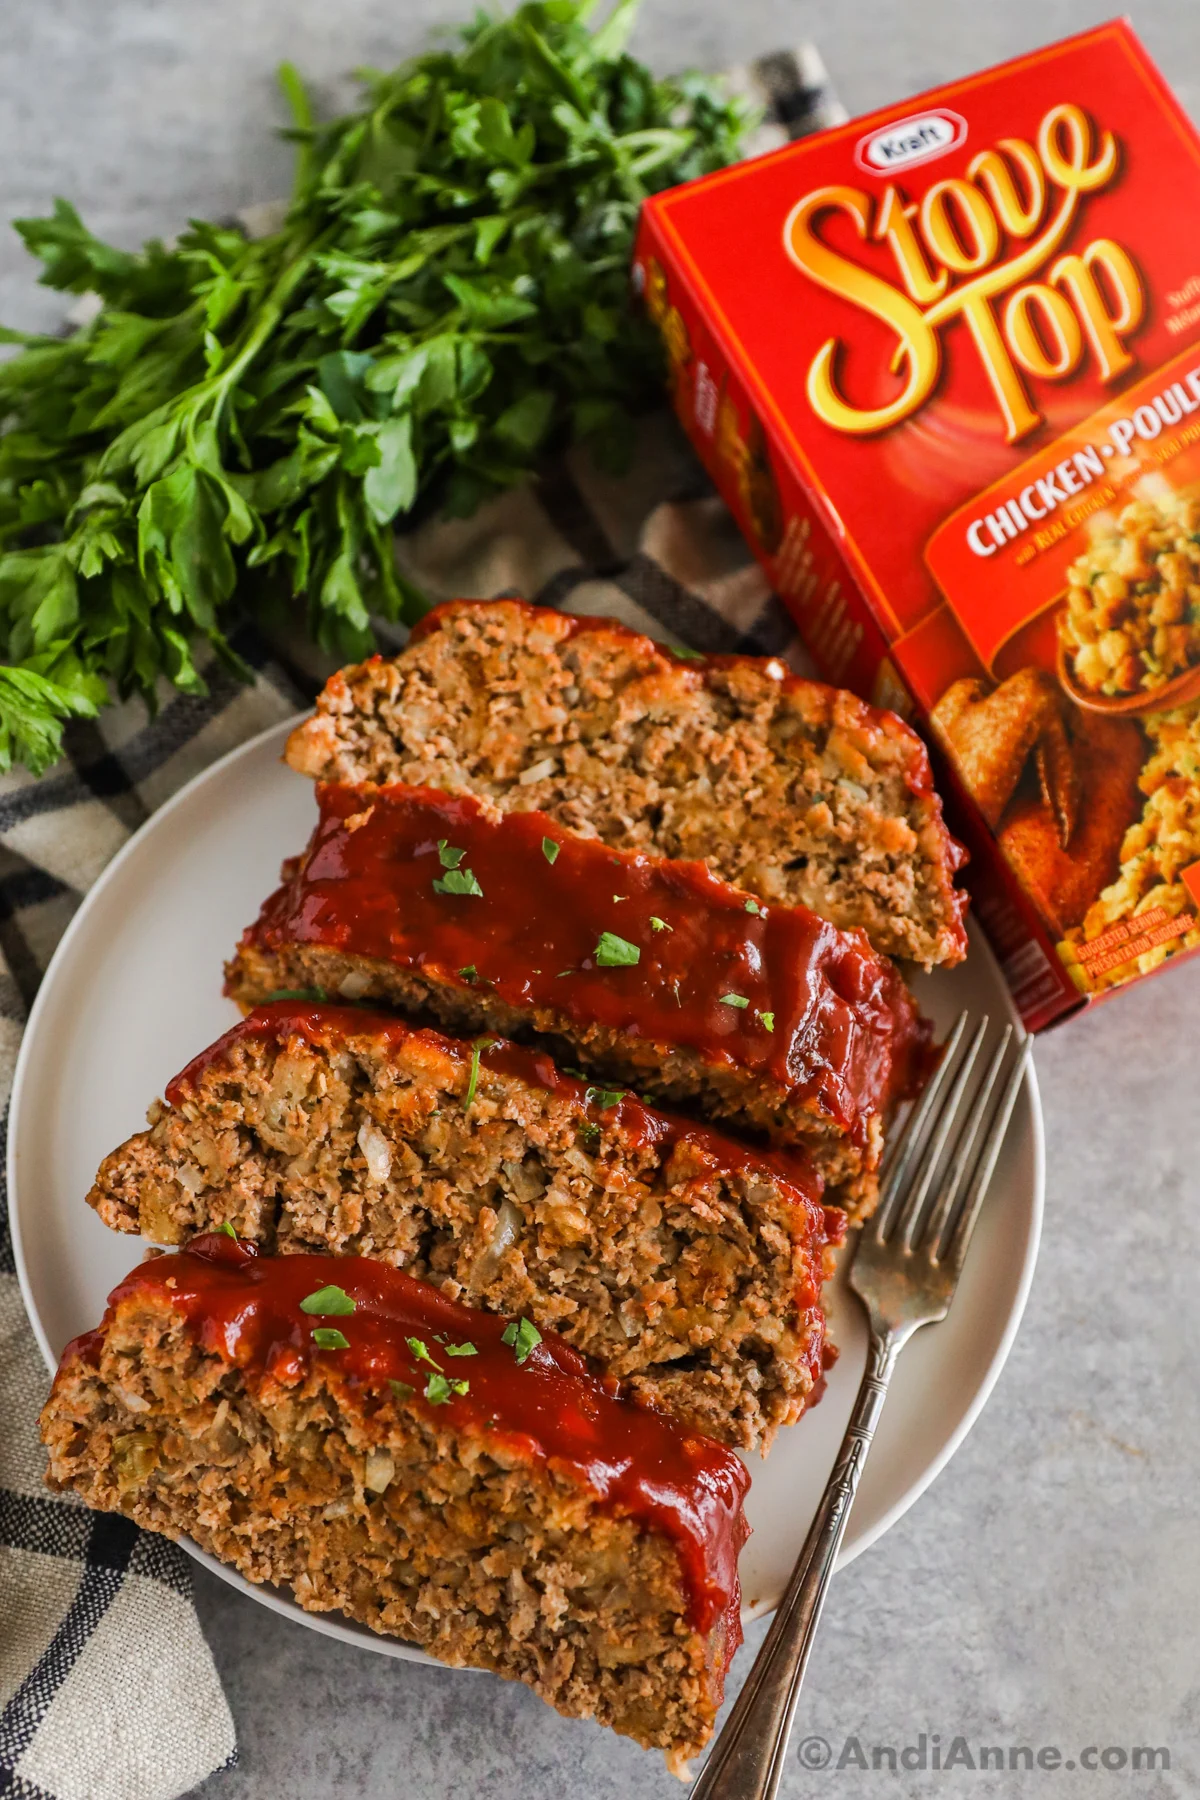 Slices of meatloaf on a plate with a fork and box of stove top stuffing and bunch of parsley beside it.